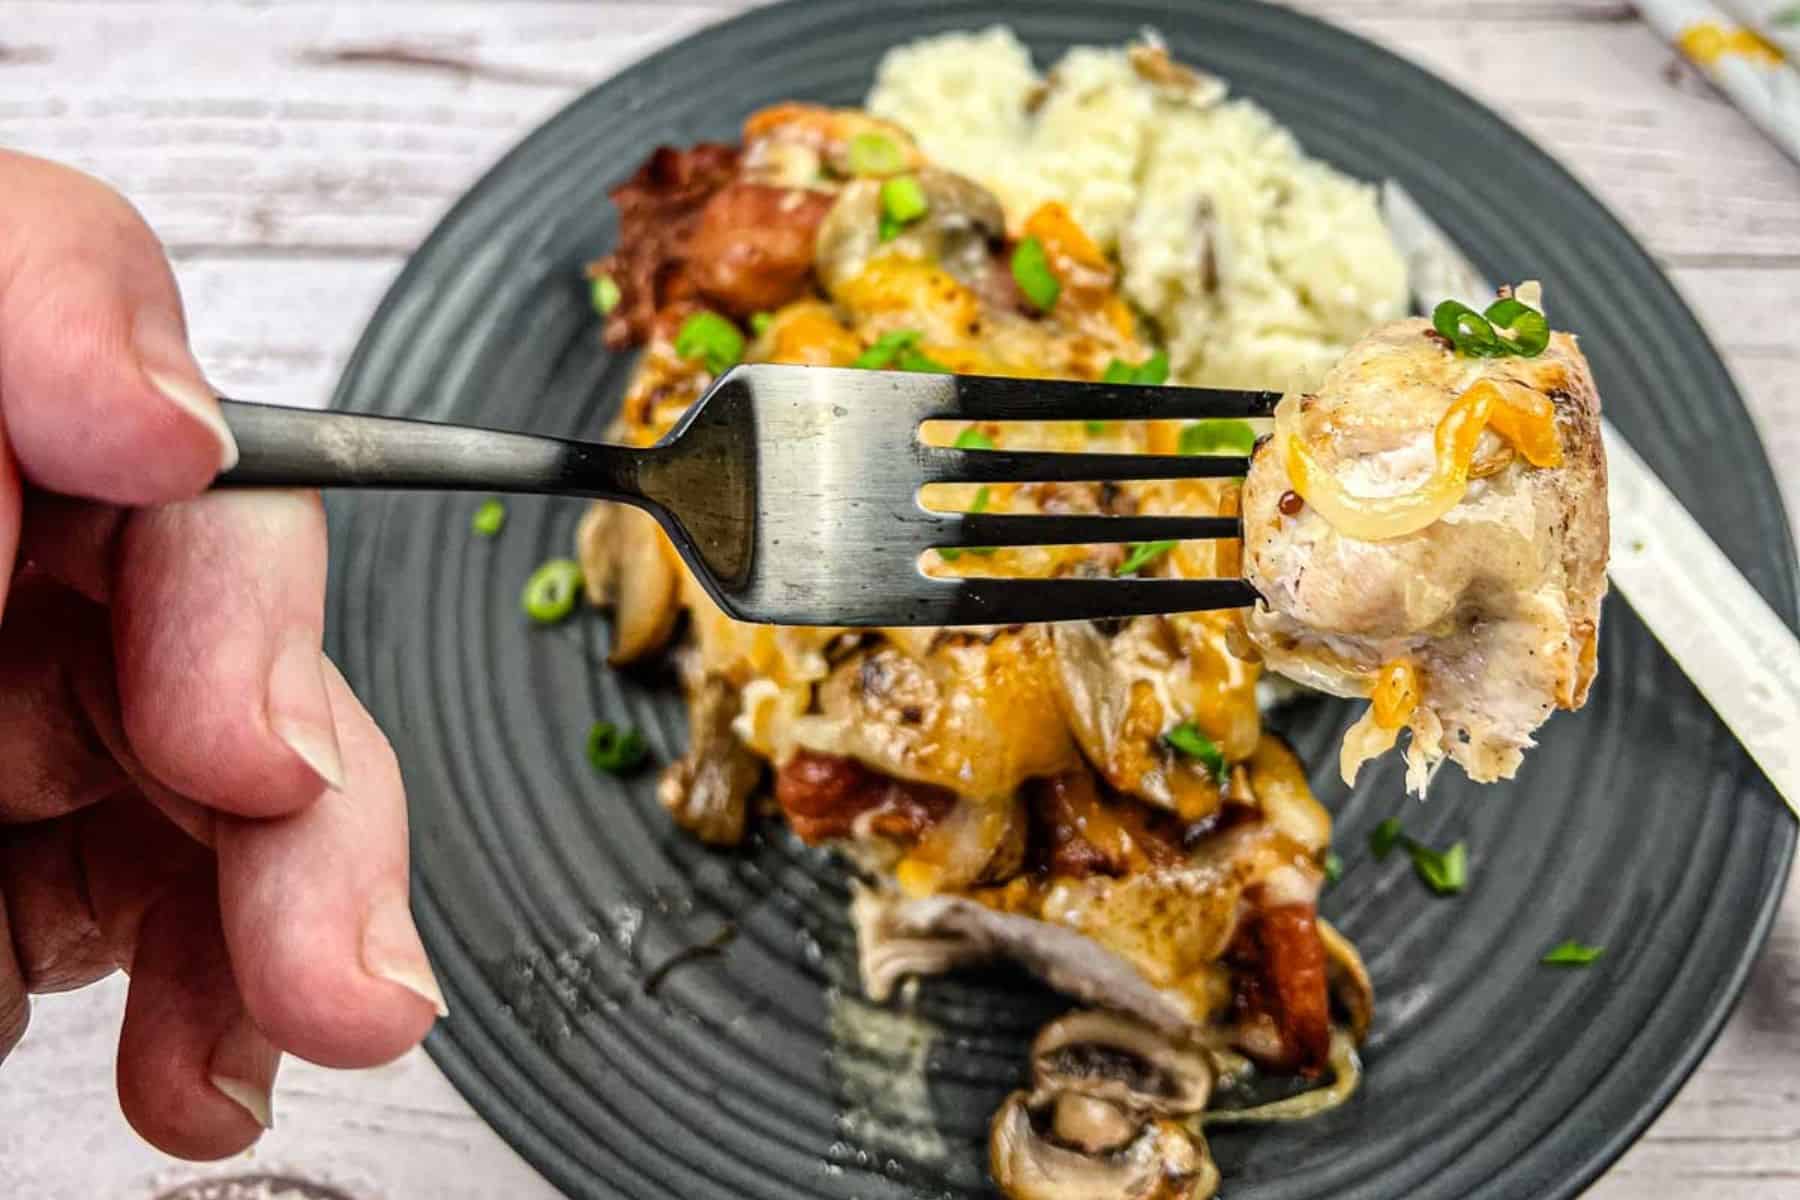 Close-up of a hand holding a fork with a bite of copycat Alice spring chicken.